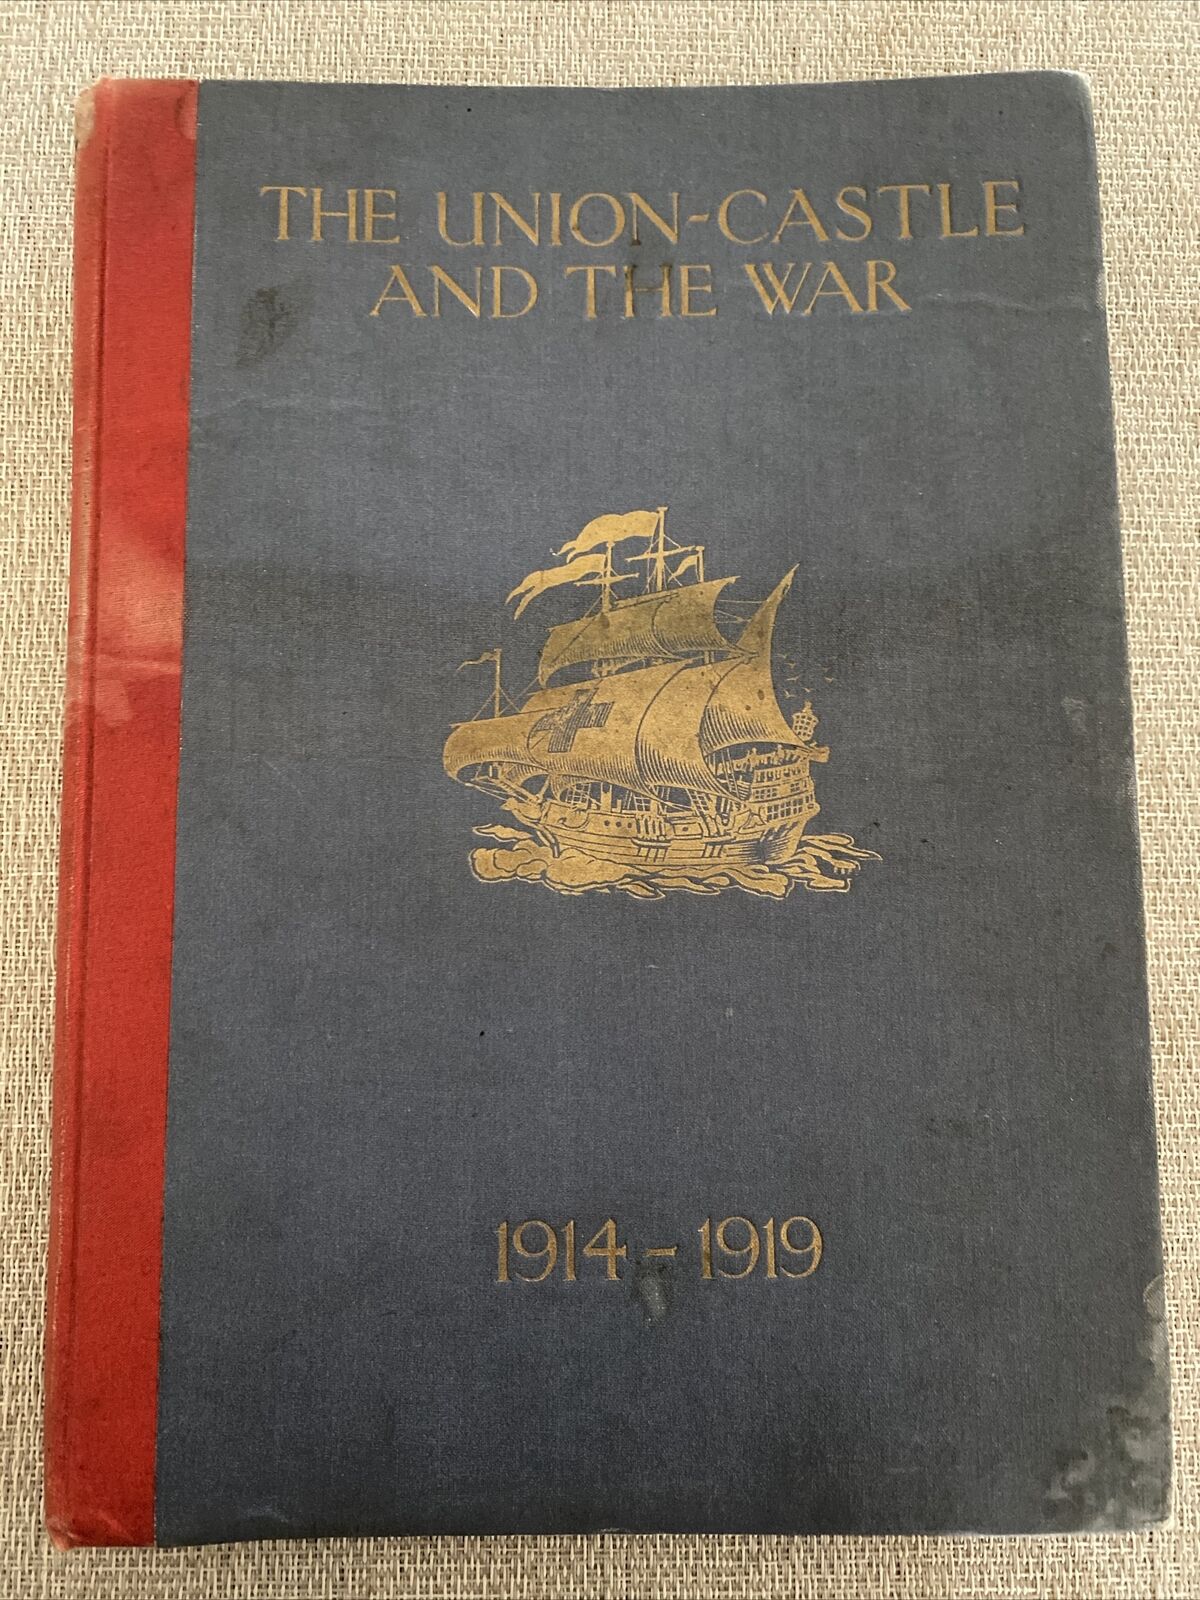 Union-Castle And The War 1914-1919 book